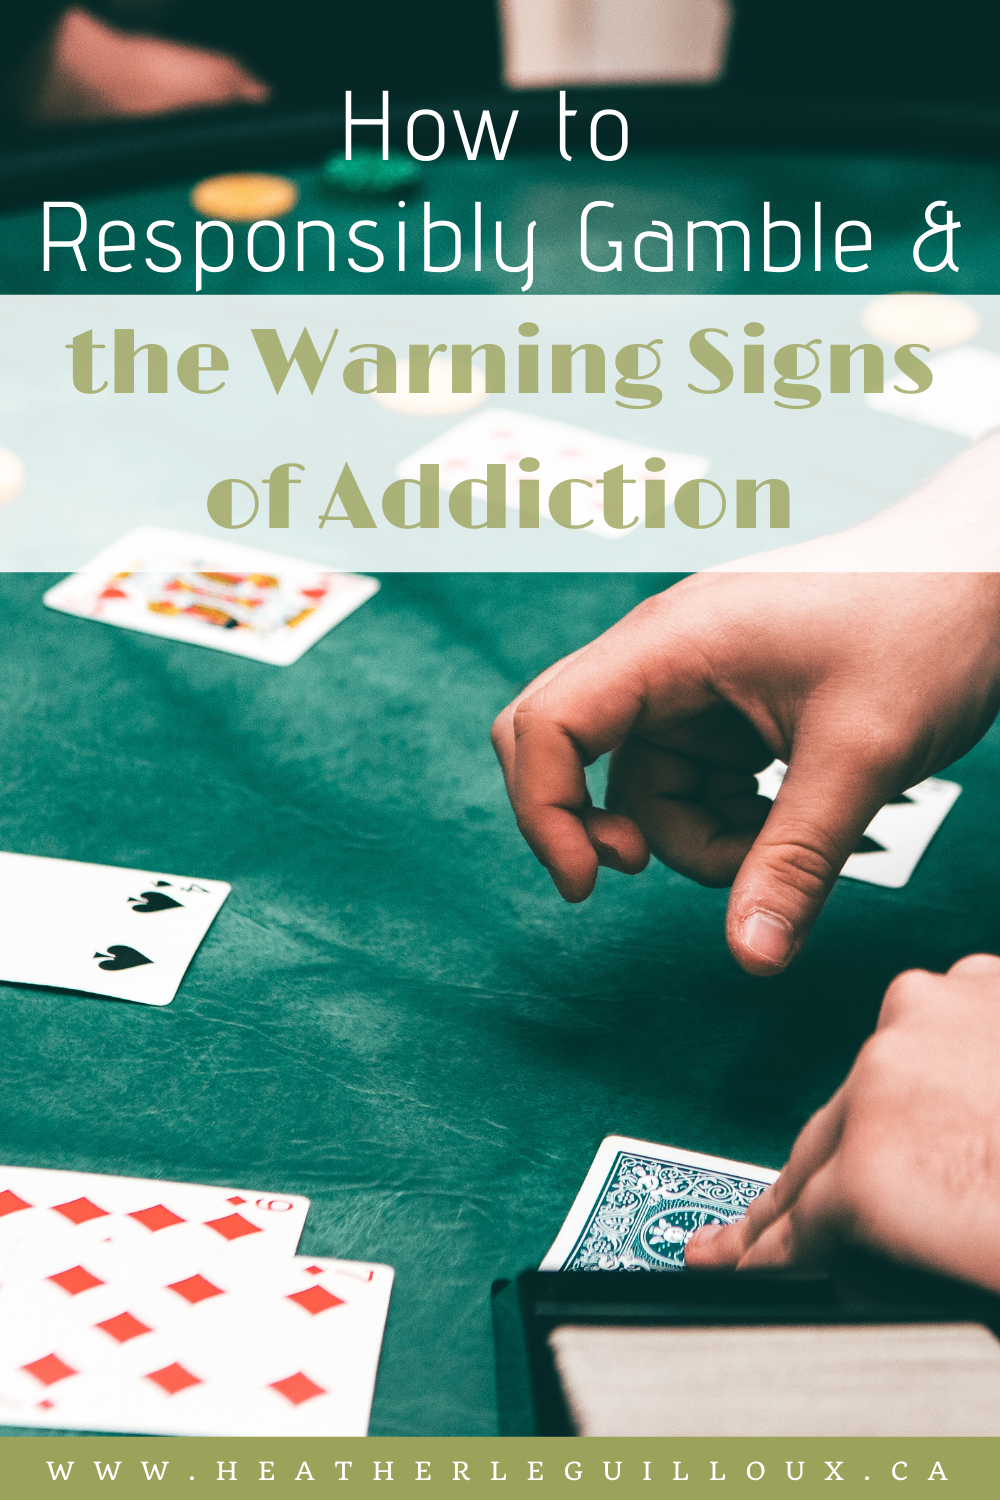 Partaking in gambling is okay if buffers and cautions can be applied. However, one can cross the line of moderation to addiction. It is quite possible to break away from such addiction. This starts with the recognition of being a gambling addict. This makes the process to recovery smooth once you can realize yourself as a gambling addict first. Depending on the root cause there are many treatment options for gambling addiction. #gambling #warningsigns #addiction #treatment #gamblingsupports